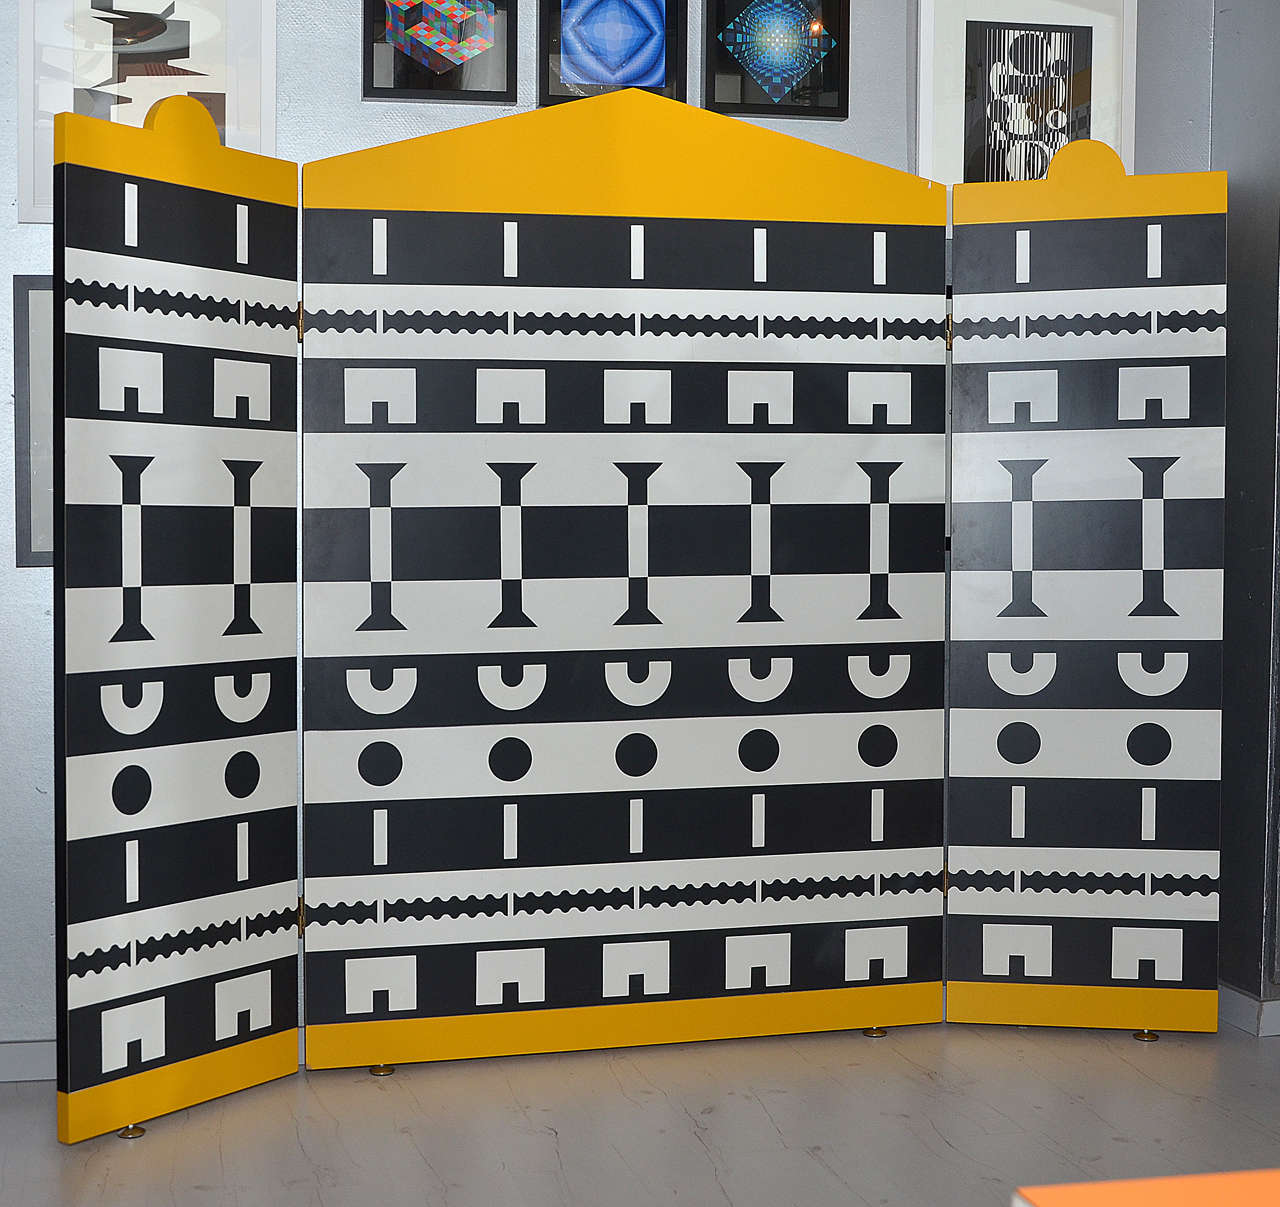 1988 three-panel screen by Alessandro Mendini and Alessandro Guerriero of the collection Ollo, edited by Alchimia; in yellow melamine decorated with black and white motifs; small legs in chromed metal. Two-sided. Dimensions of opened screen must